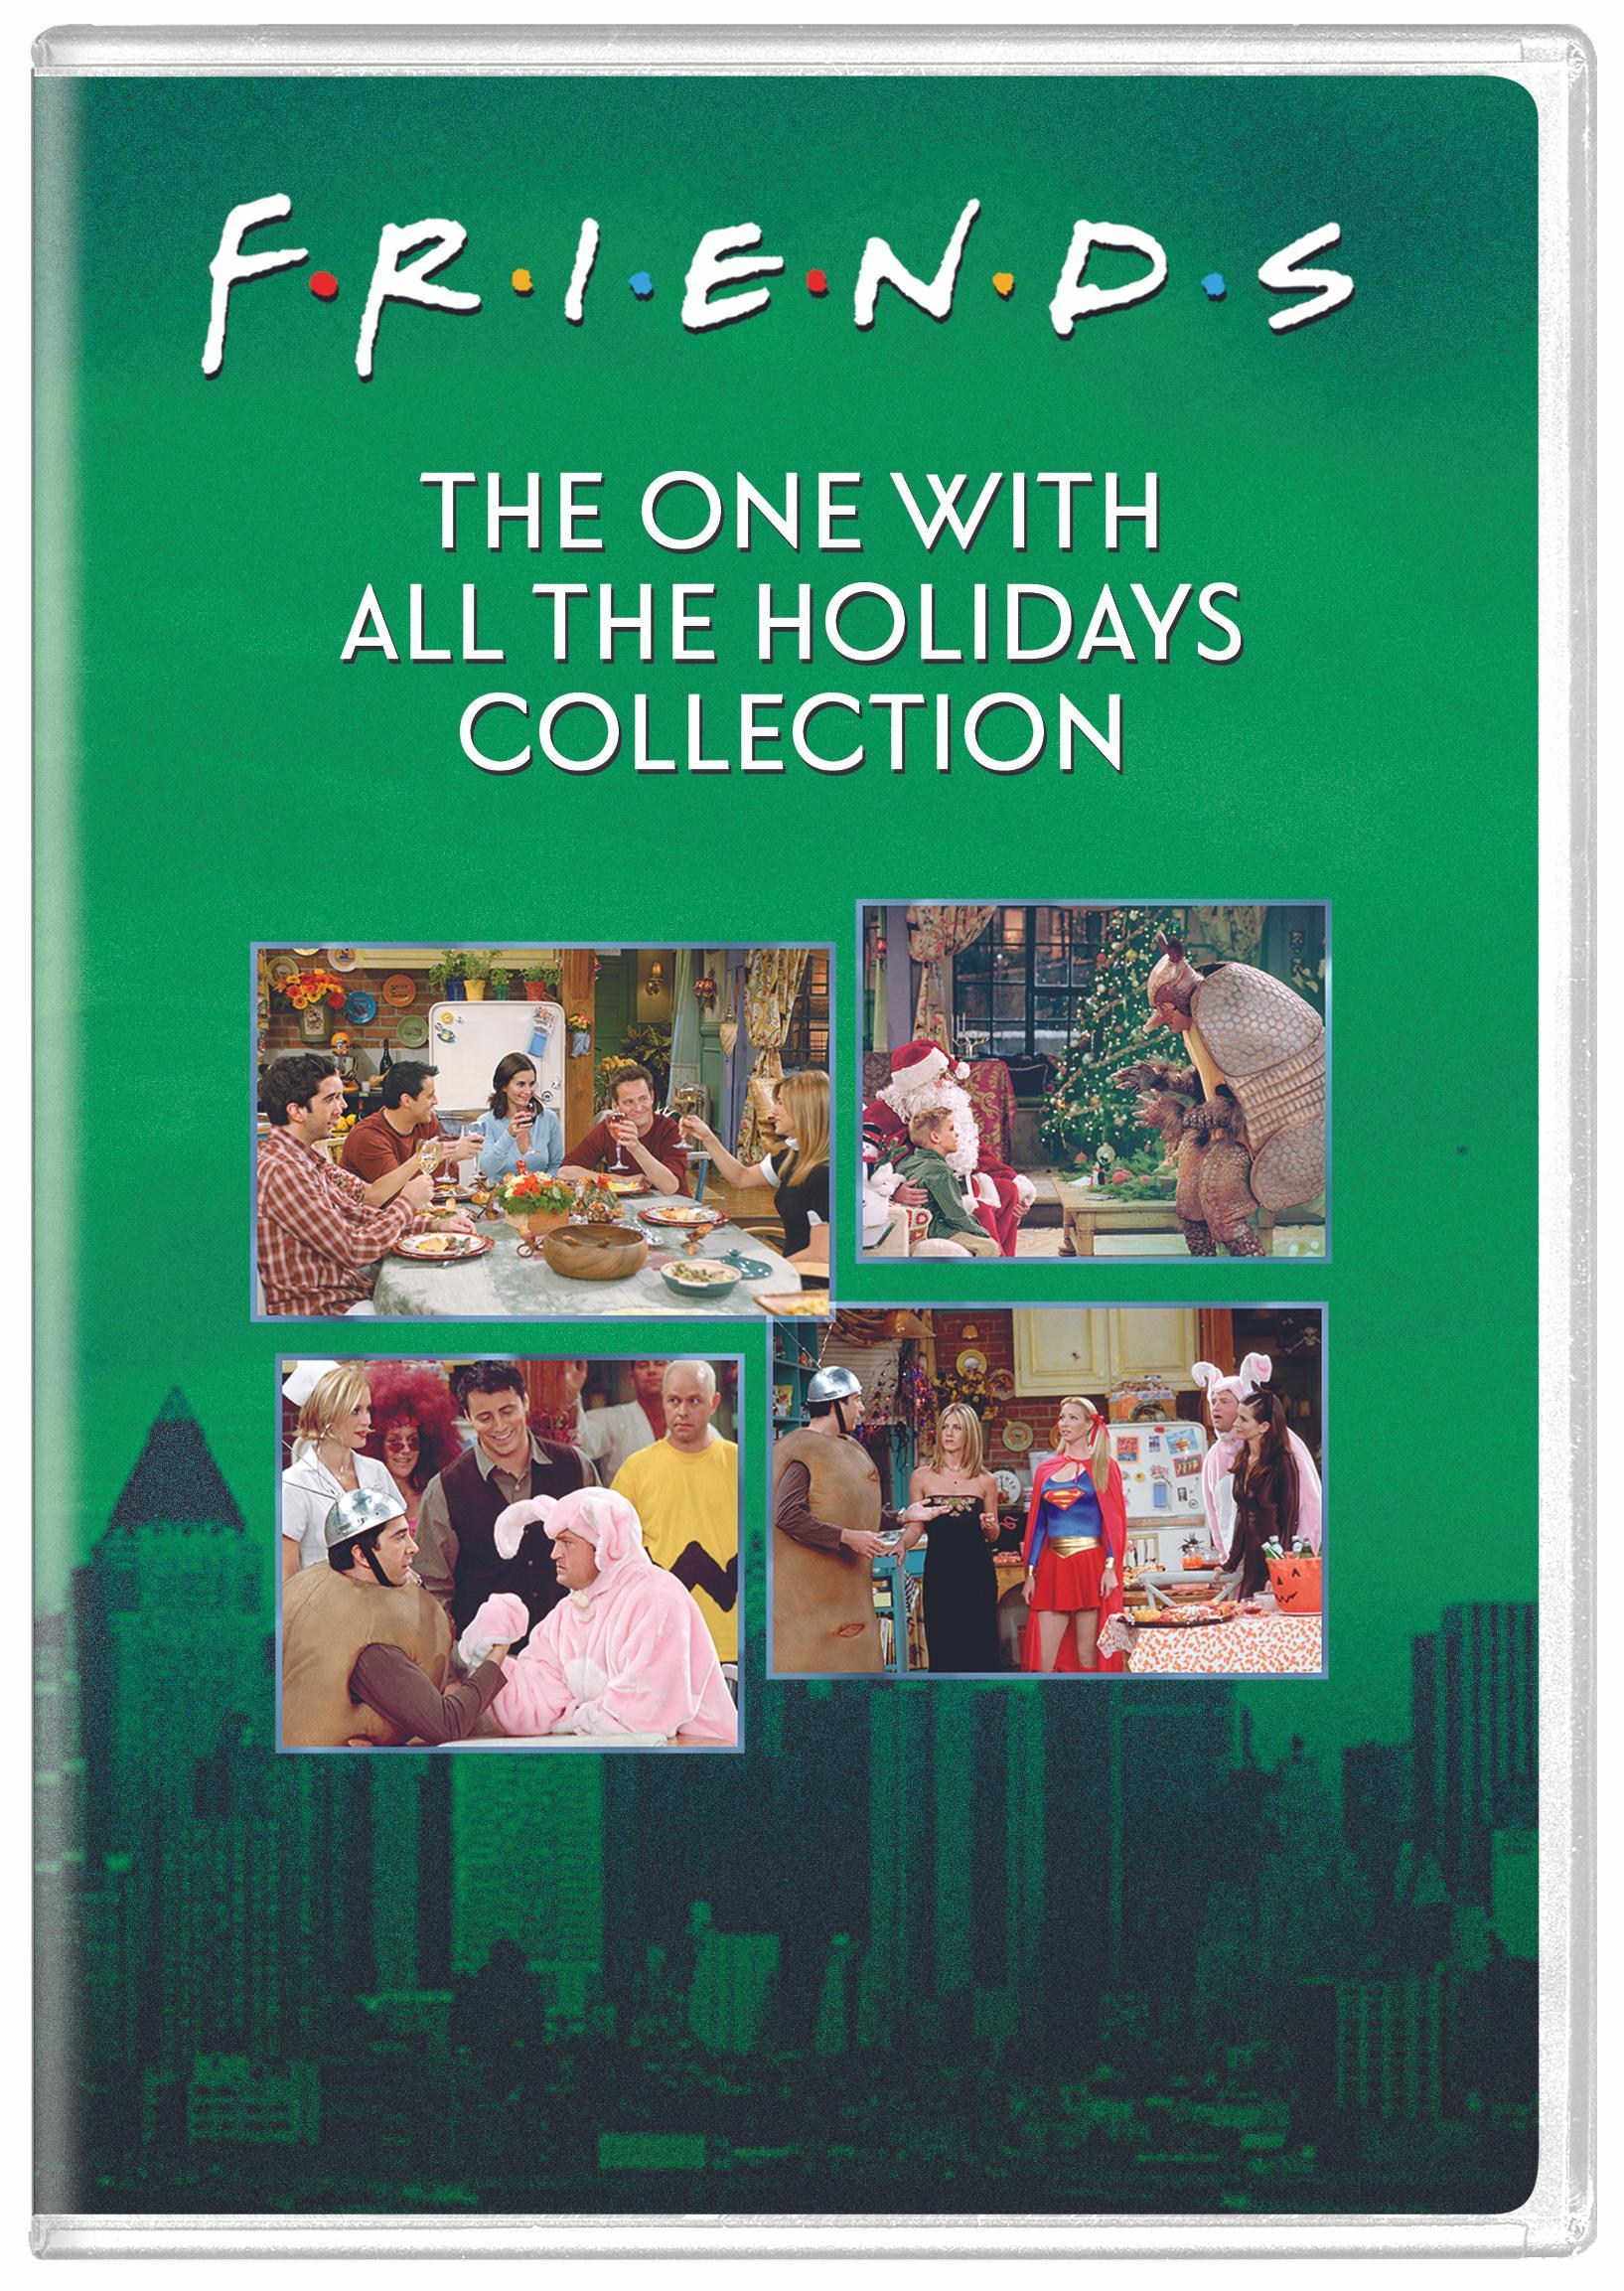 Friends: The One With All The Holidays - DVD [ 2022 ]  - Comedy Television On DVD - TV Shows On GRUV